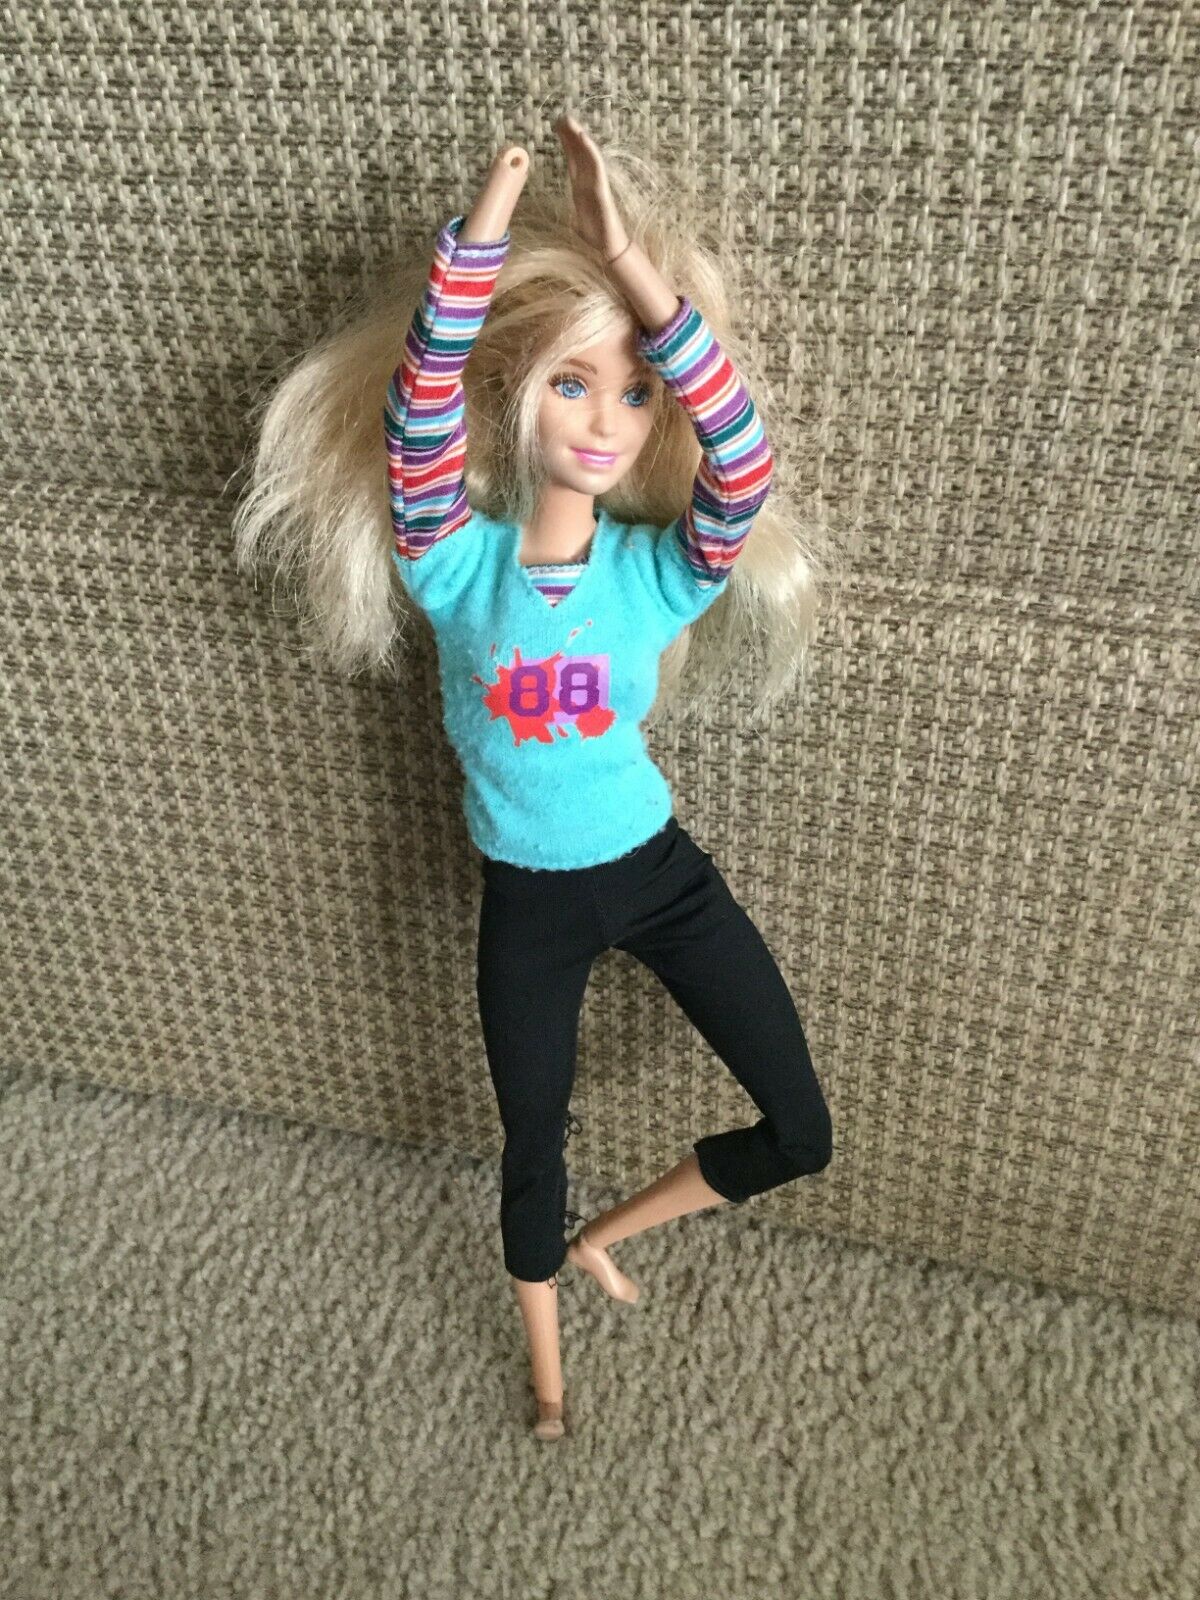 2015 Mattel Barbie MADE TO MOVE Yoga #DHL82 Barbie Doll Blonde in Yoga Pants